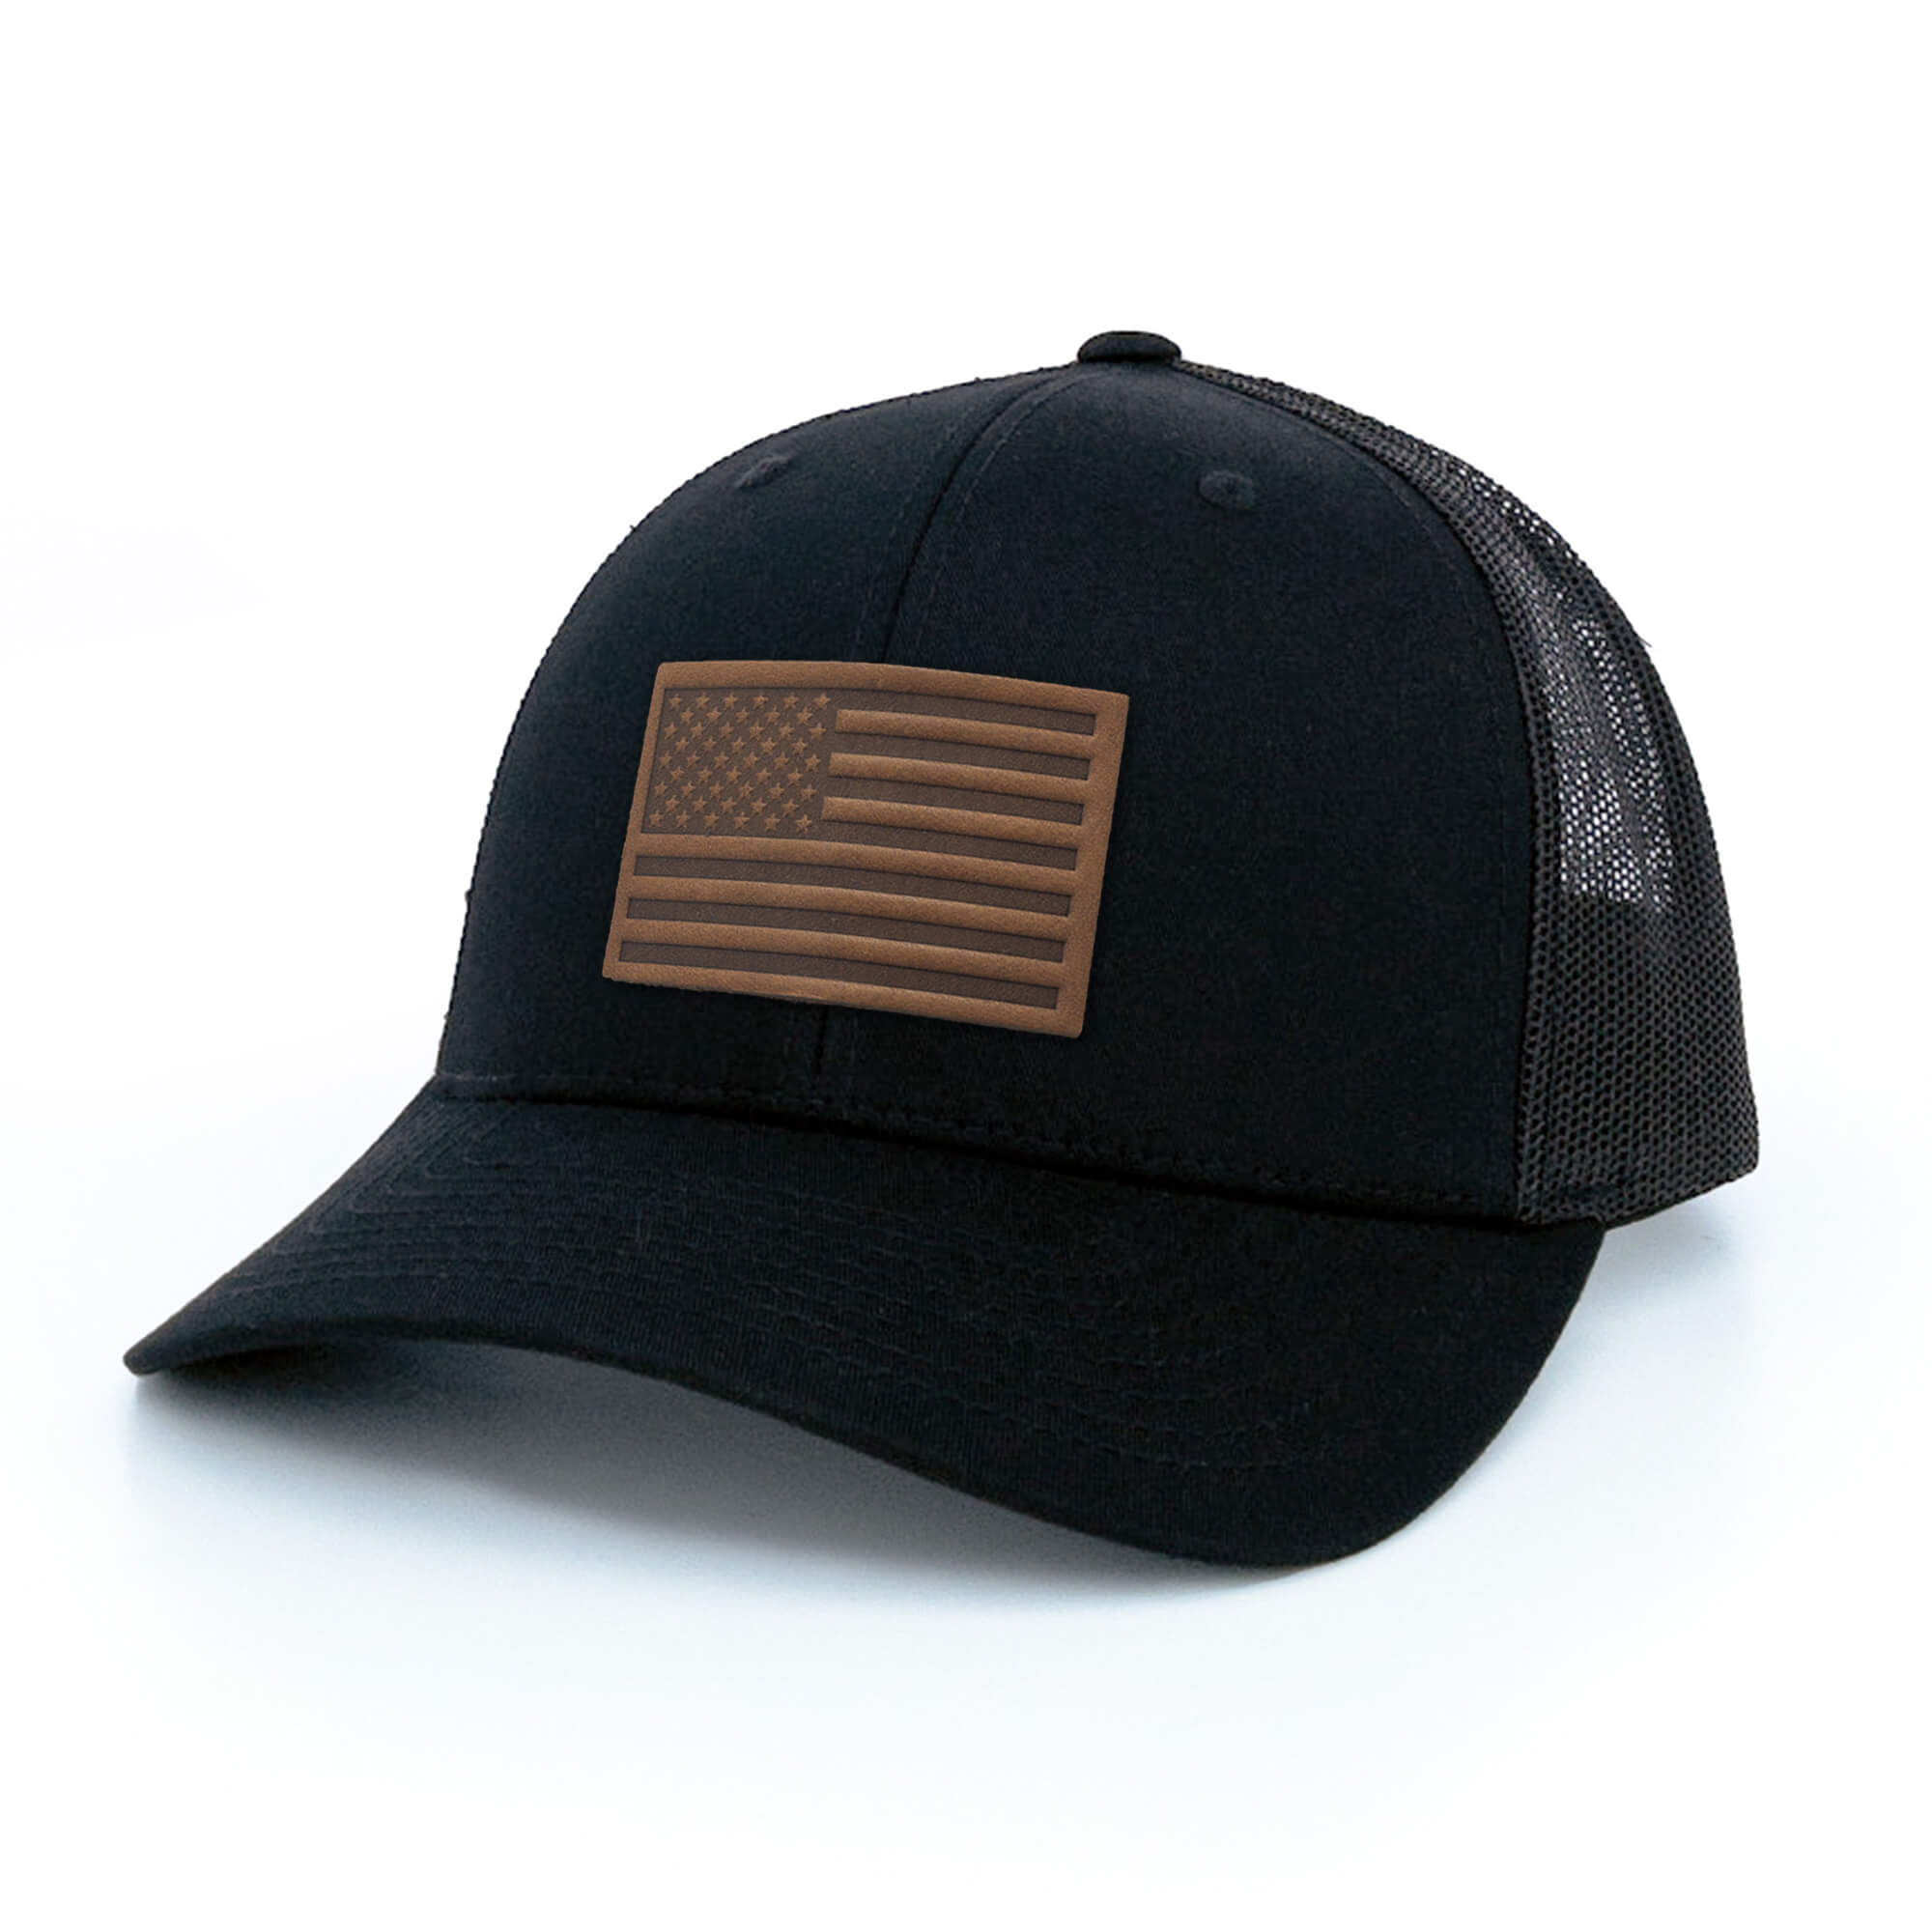 Black trucker hat with full-grain leather patch of USA Flag | BLACK-003-012, CHARC-003-012, NAVY-003-012, HGREY-003-012, MOSS-003-012, BROWN-003-012